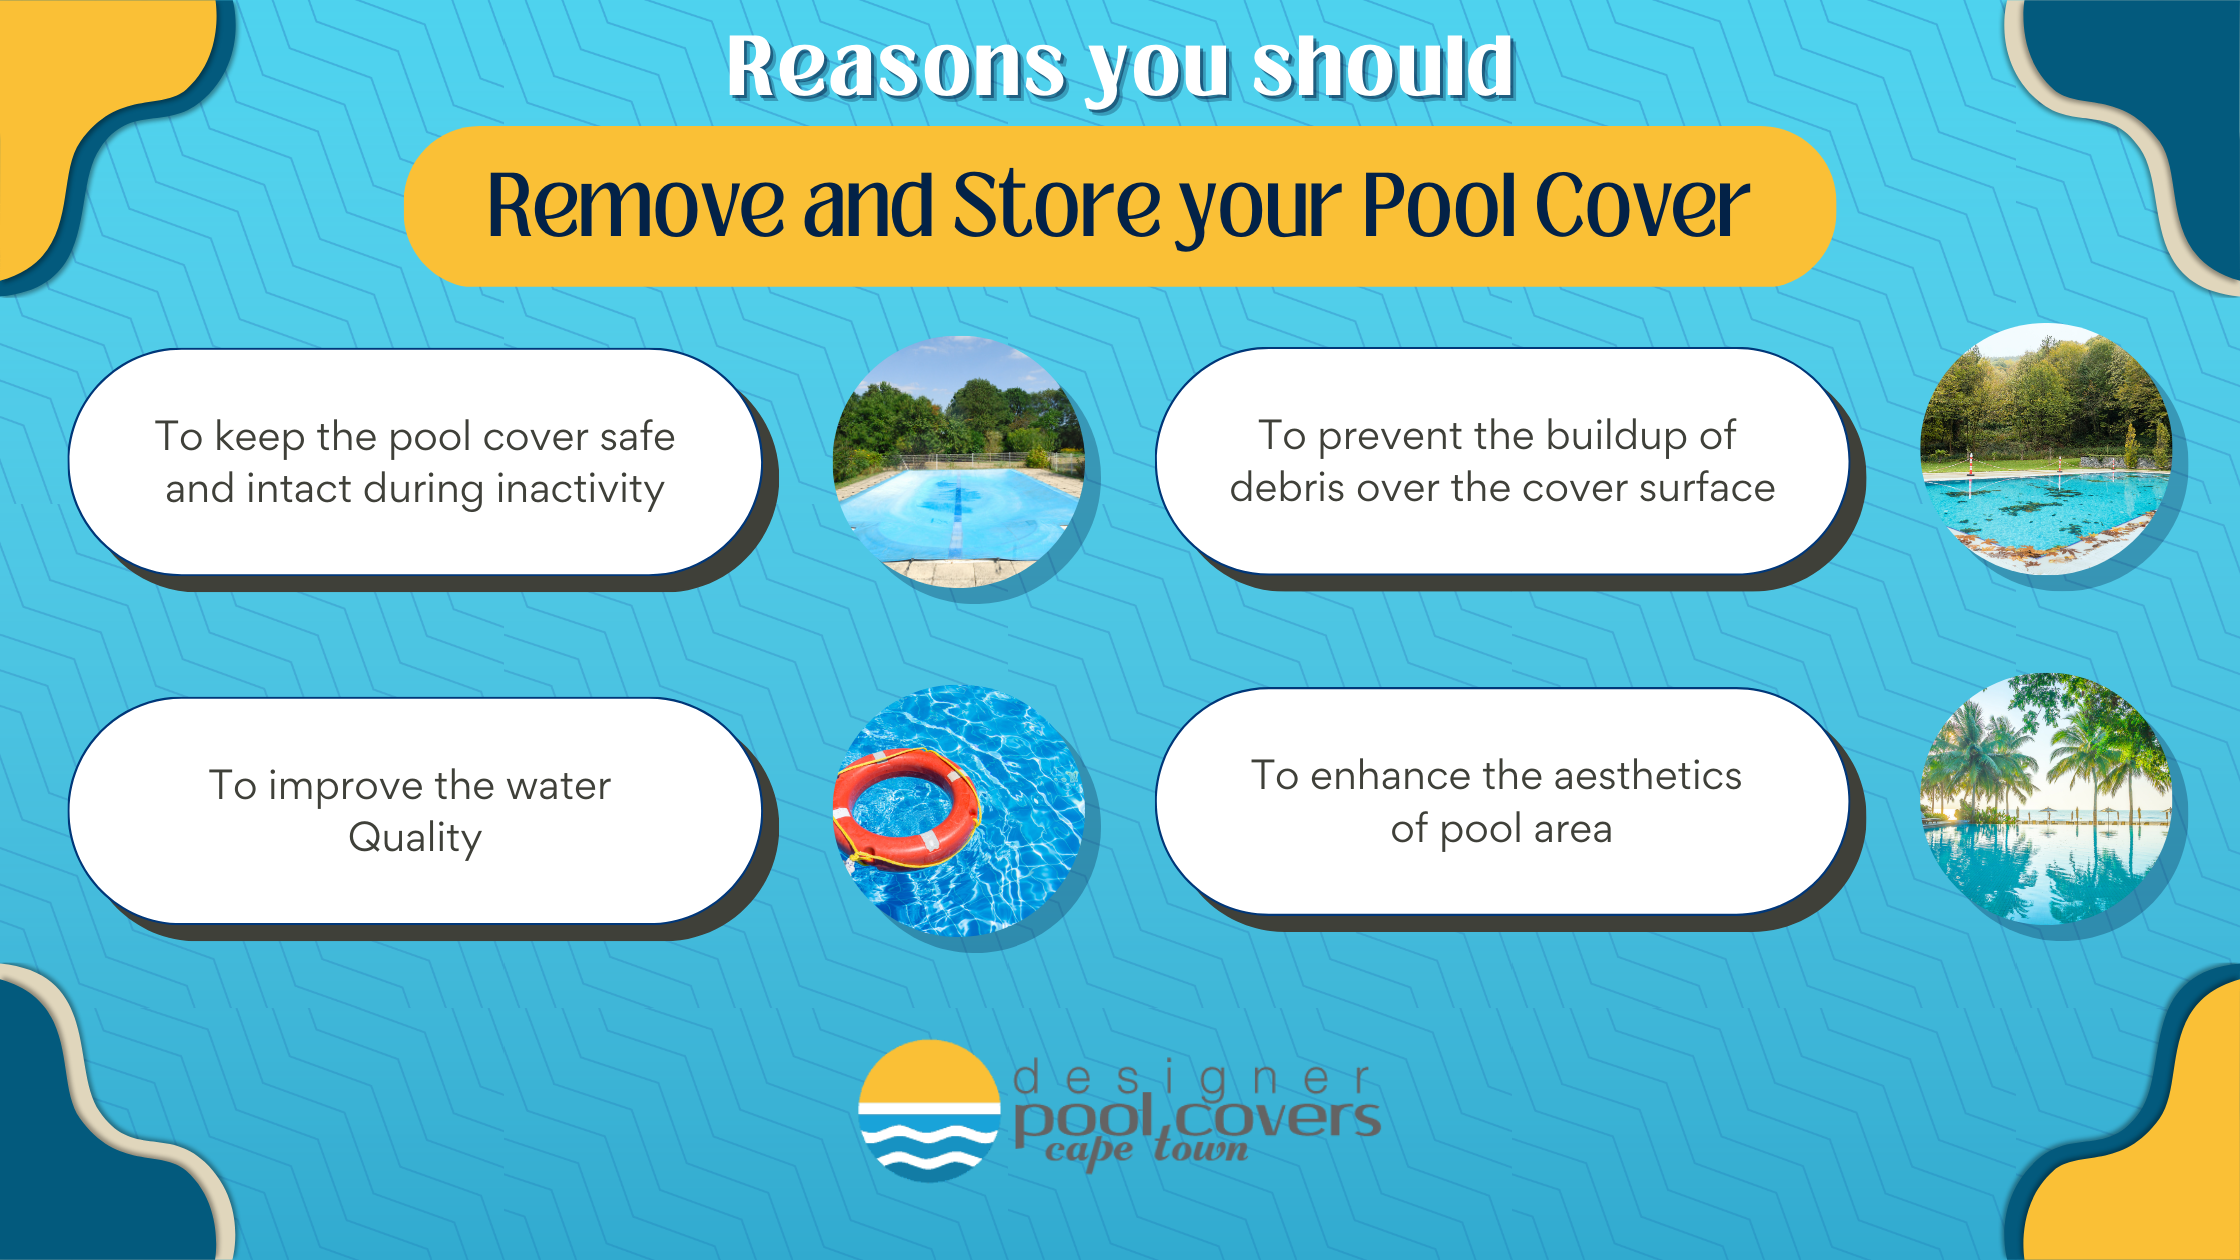 Benefits of removing and storing the pool covers 